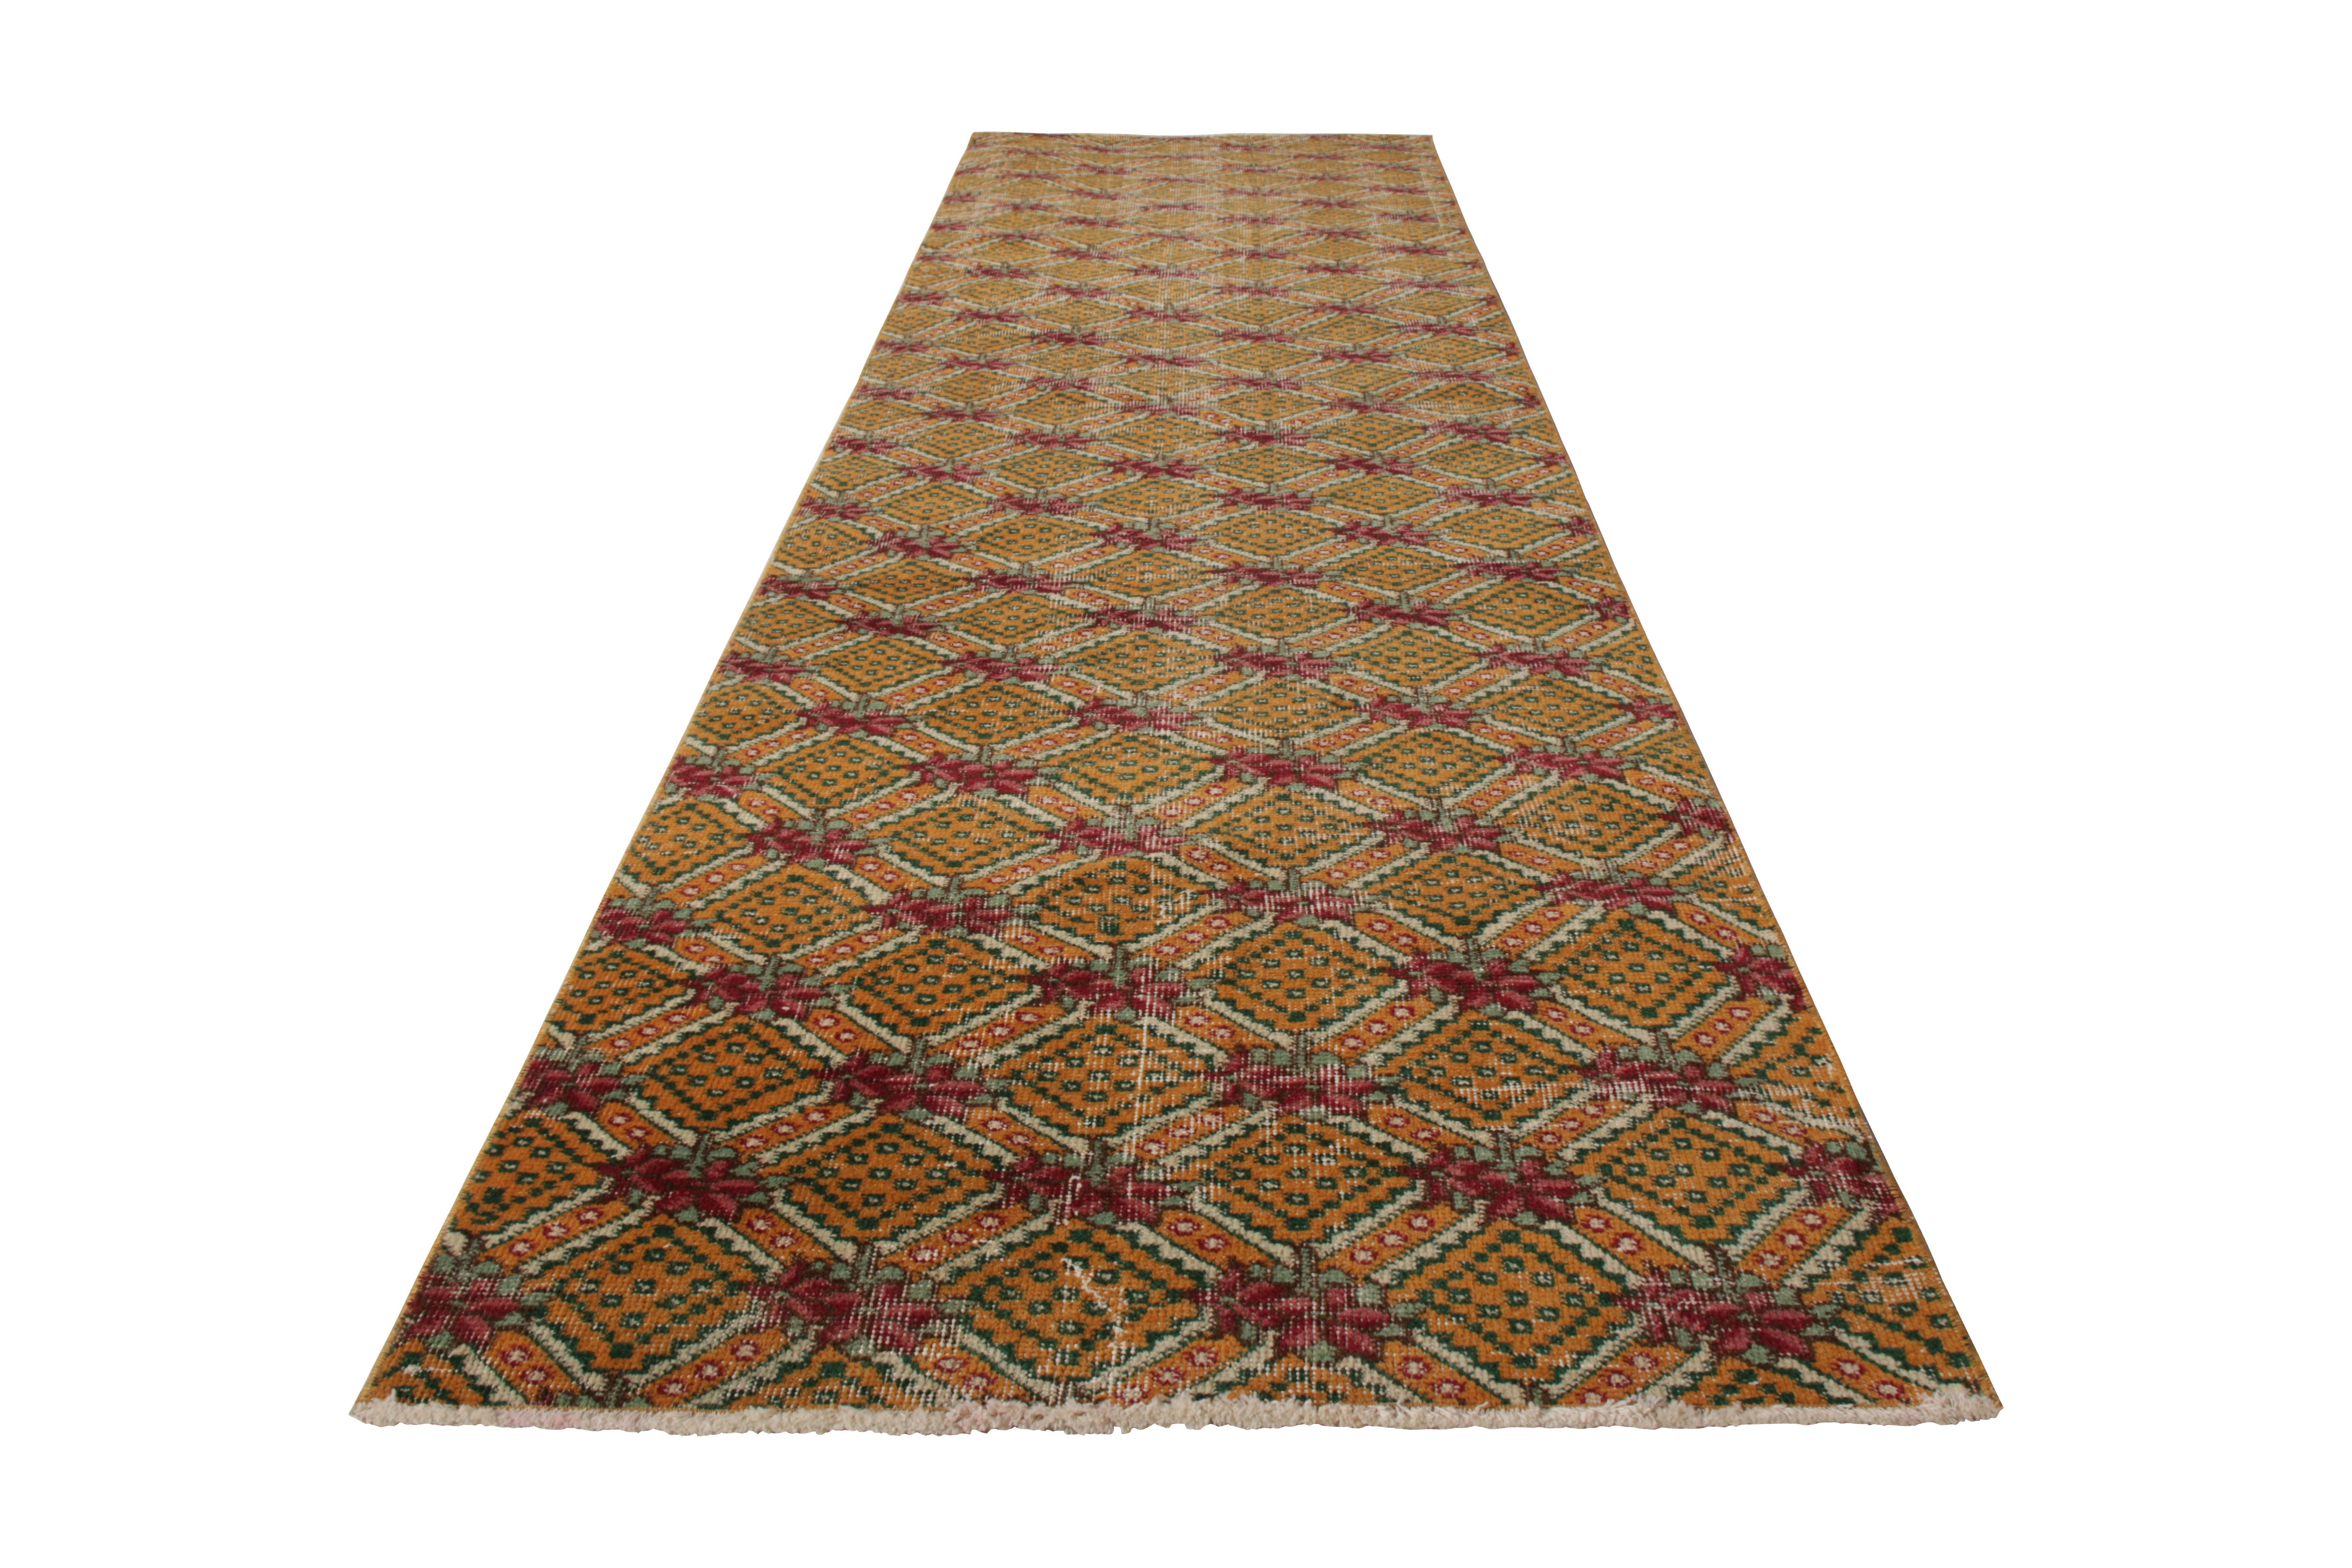 Hand knotted in Turkey originating between 1960-1970, this vintage midcentury runner joins Rug & Kilim’s midcentury Pasha collection celebrating Turkish icon Zeki Müren with Josh’s hand picked favorites from this period. This particular design